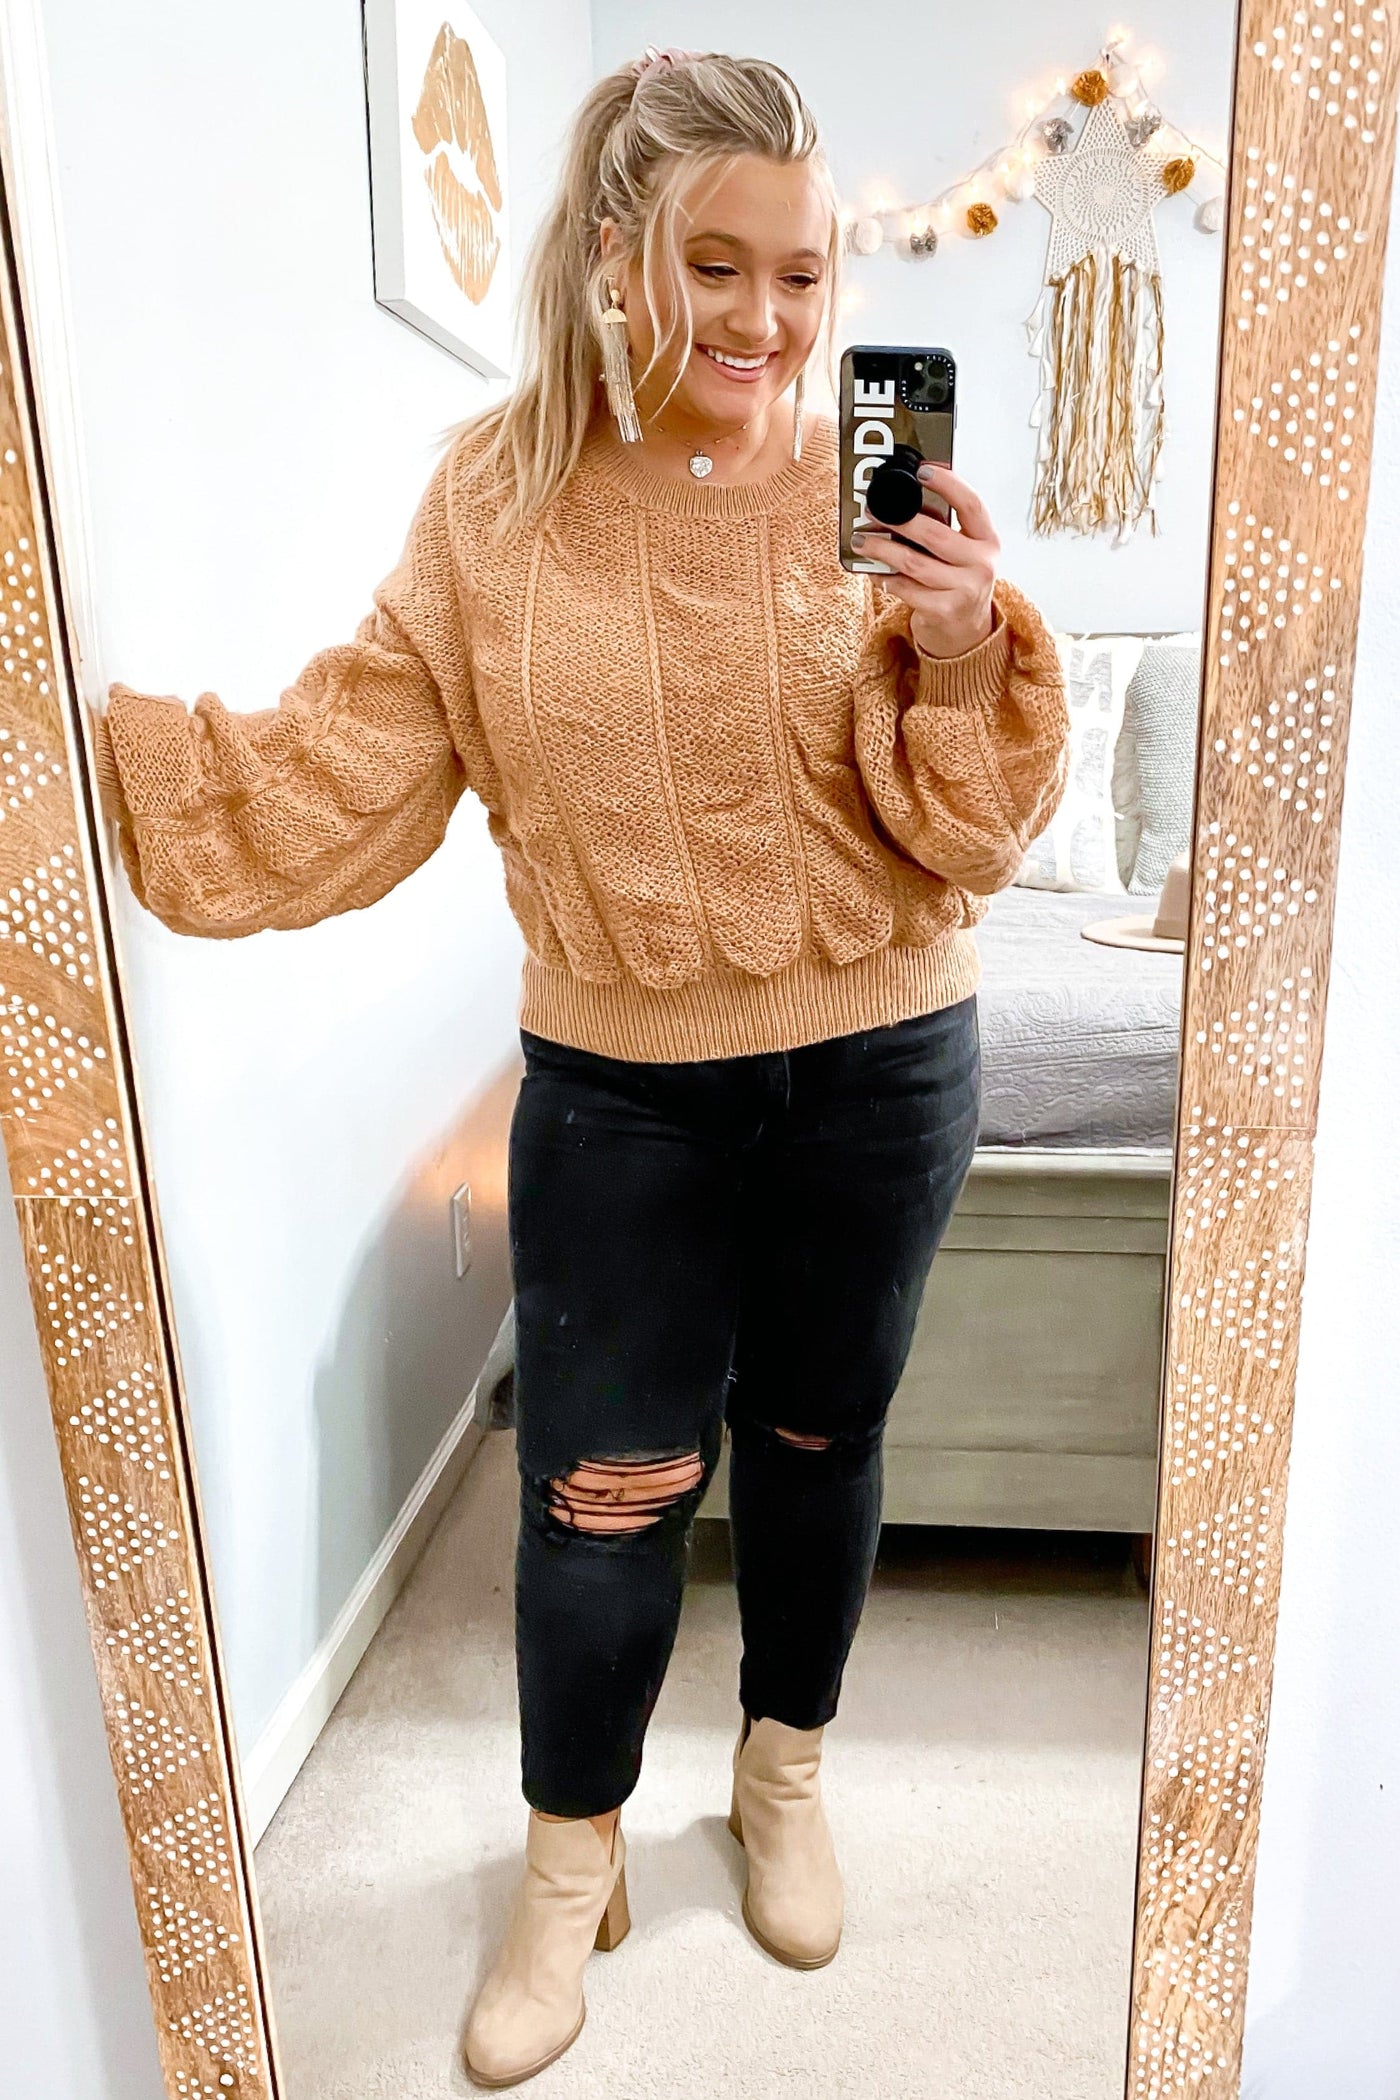  Late Night Talks Ruched Knit Sweater - FINAL SALE - Madison and Mallory